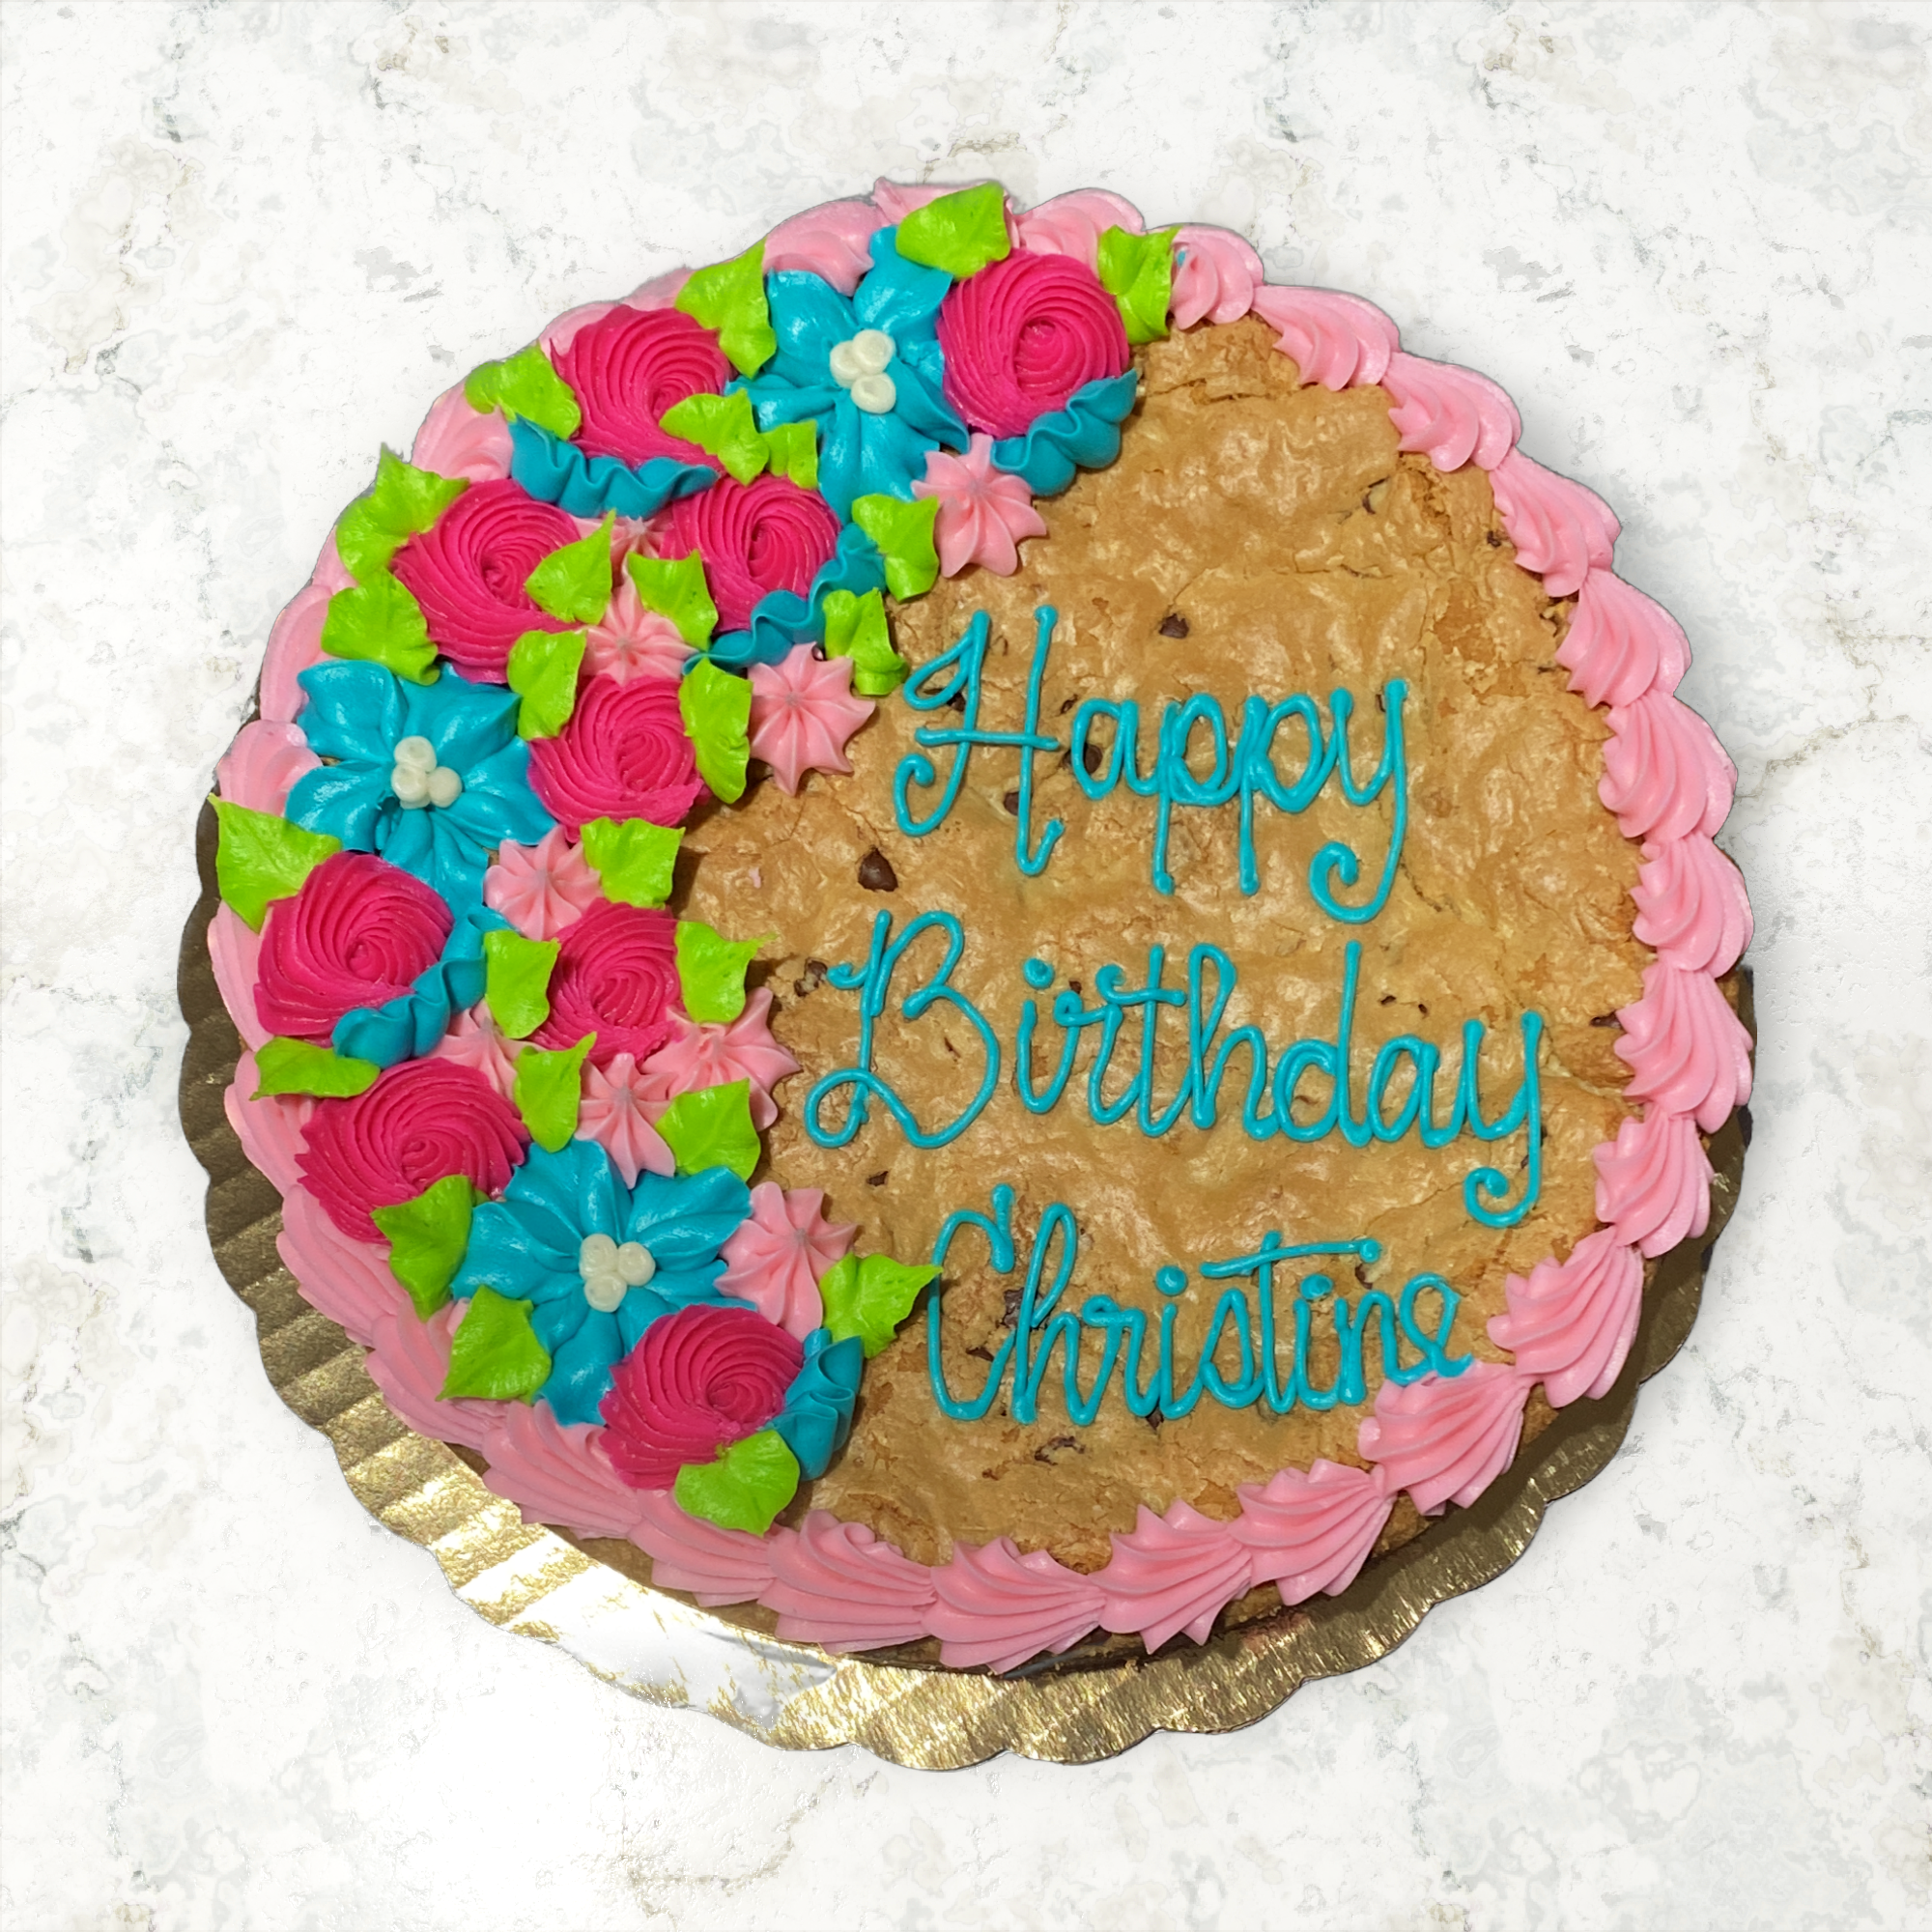 Cookie Cake | Our CupCakery 54 S. High St. Dublin OH 43017 614-659 ...